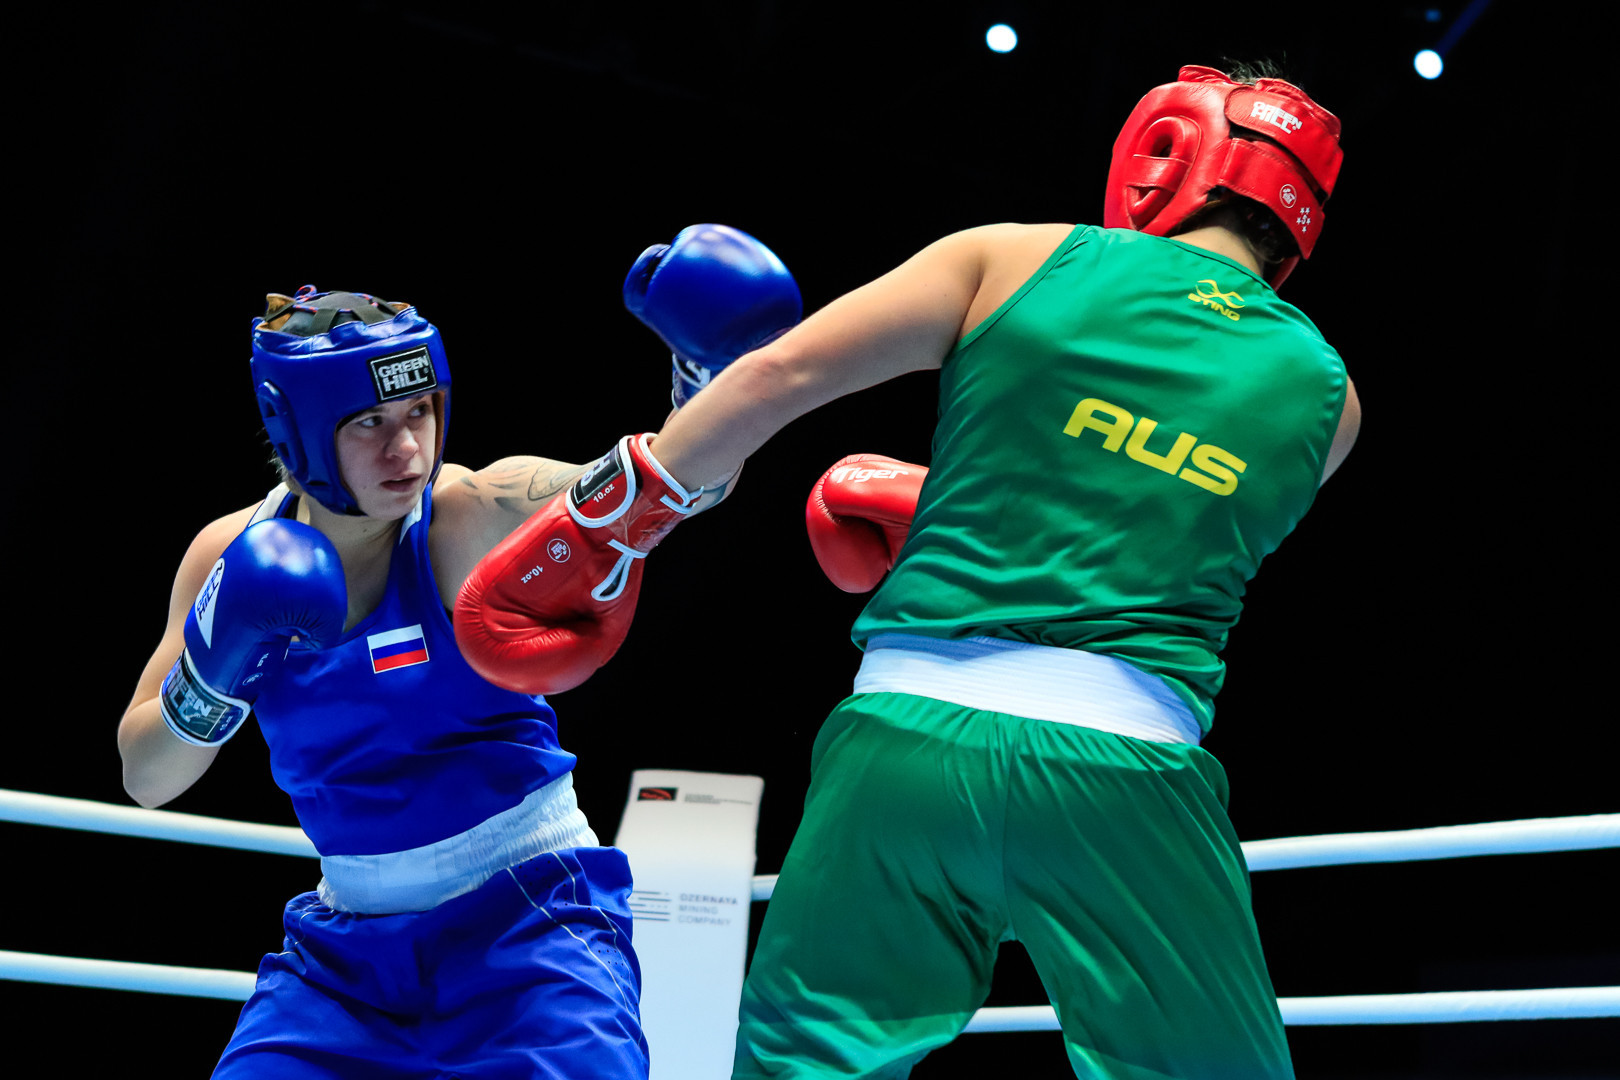 Young talent Dynnik continues Russian success at AIBA Women's World Boxing Championships